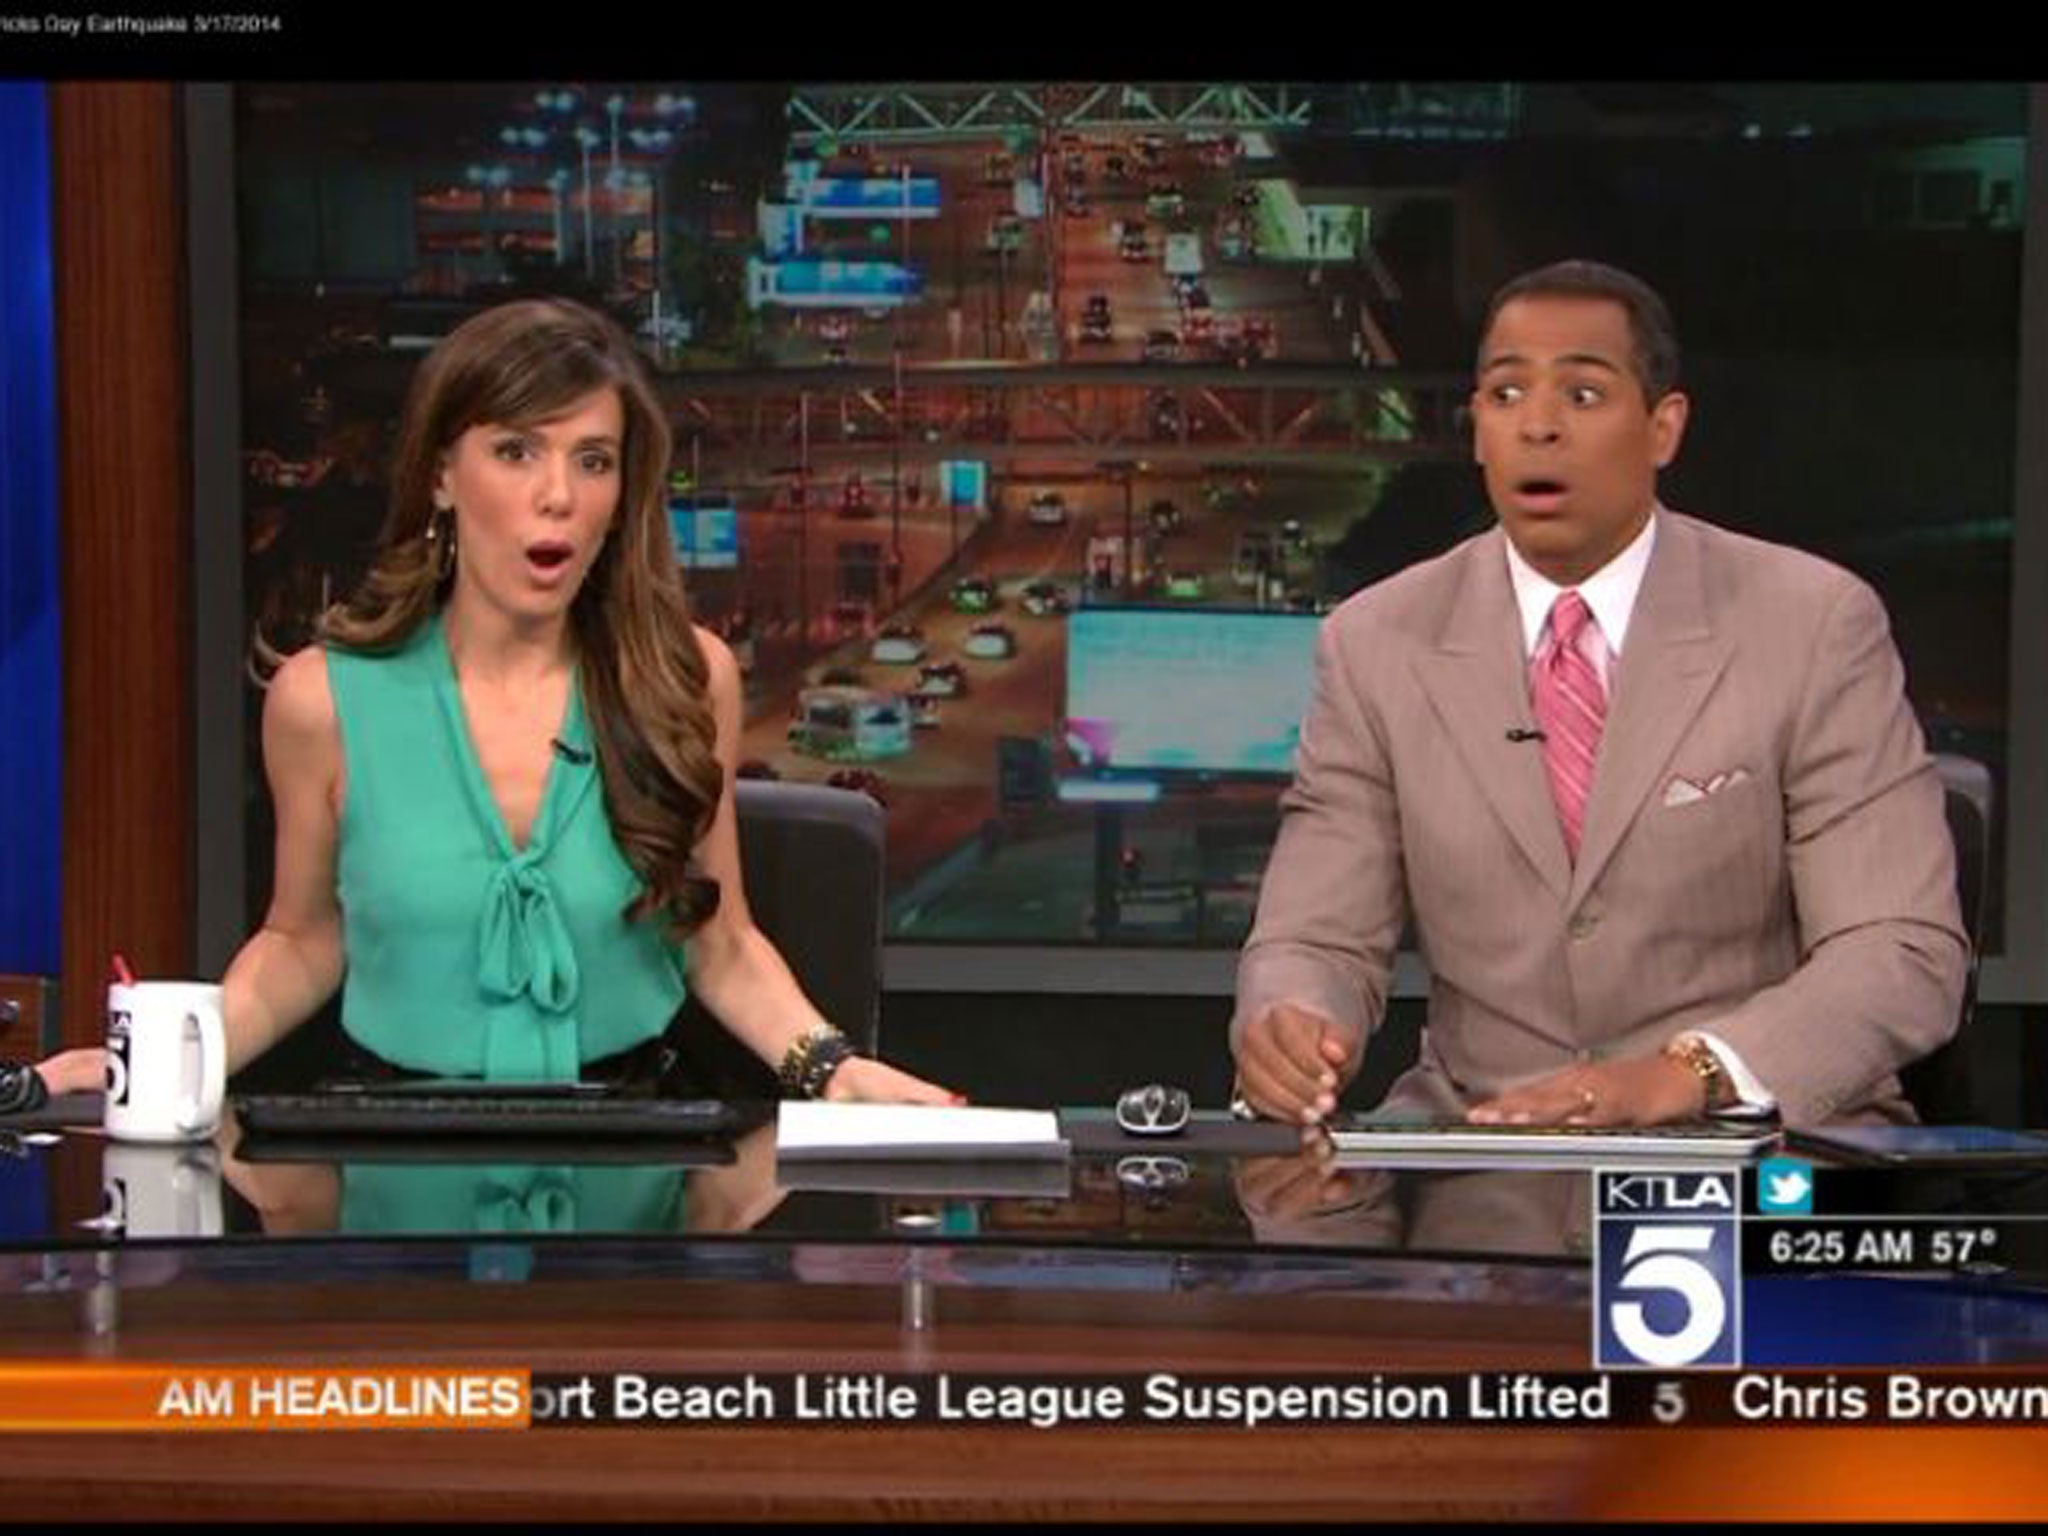 KTLA presenters broadcast while a 4.4 earthquake rumbles through Los Angeles on 17 March